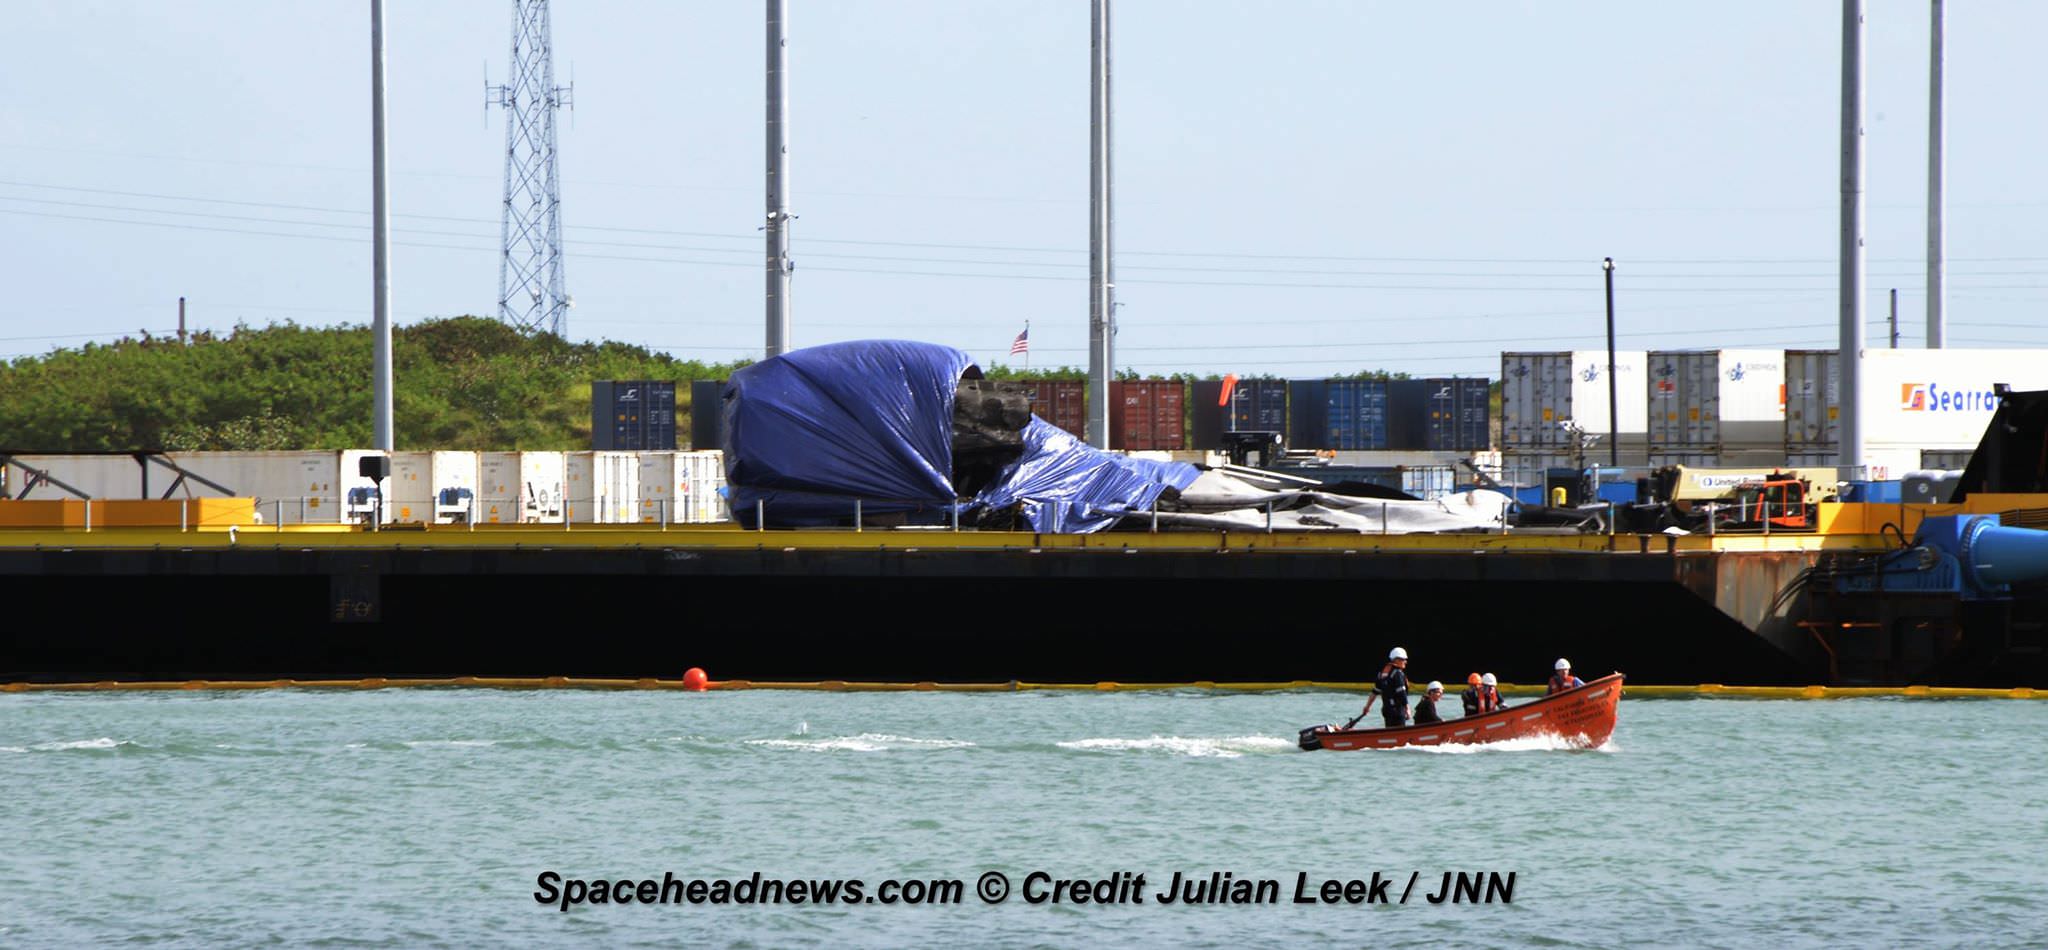 Flattened SpaceX Falcon 9 first stage arrived into Port Canaveral, FL atop a droneship late Saturday, June 18 after hard landing and tipping over following successful June 15, 2016  commercial payload launch.  Credit: Julian Leek  